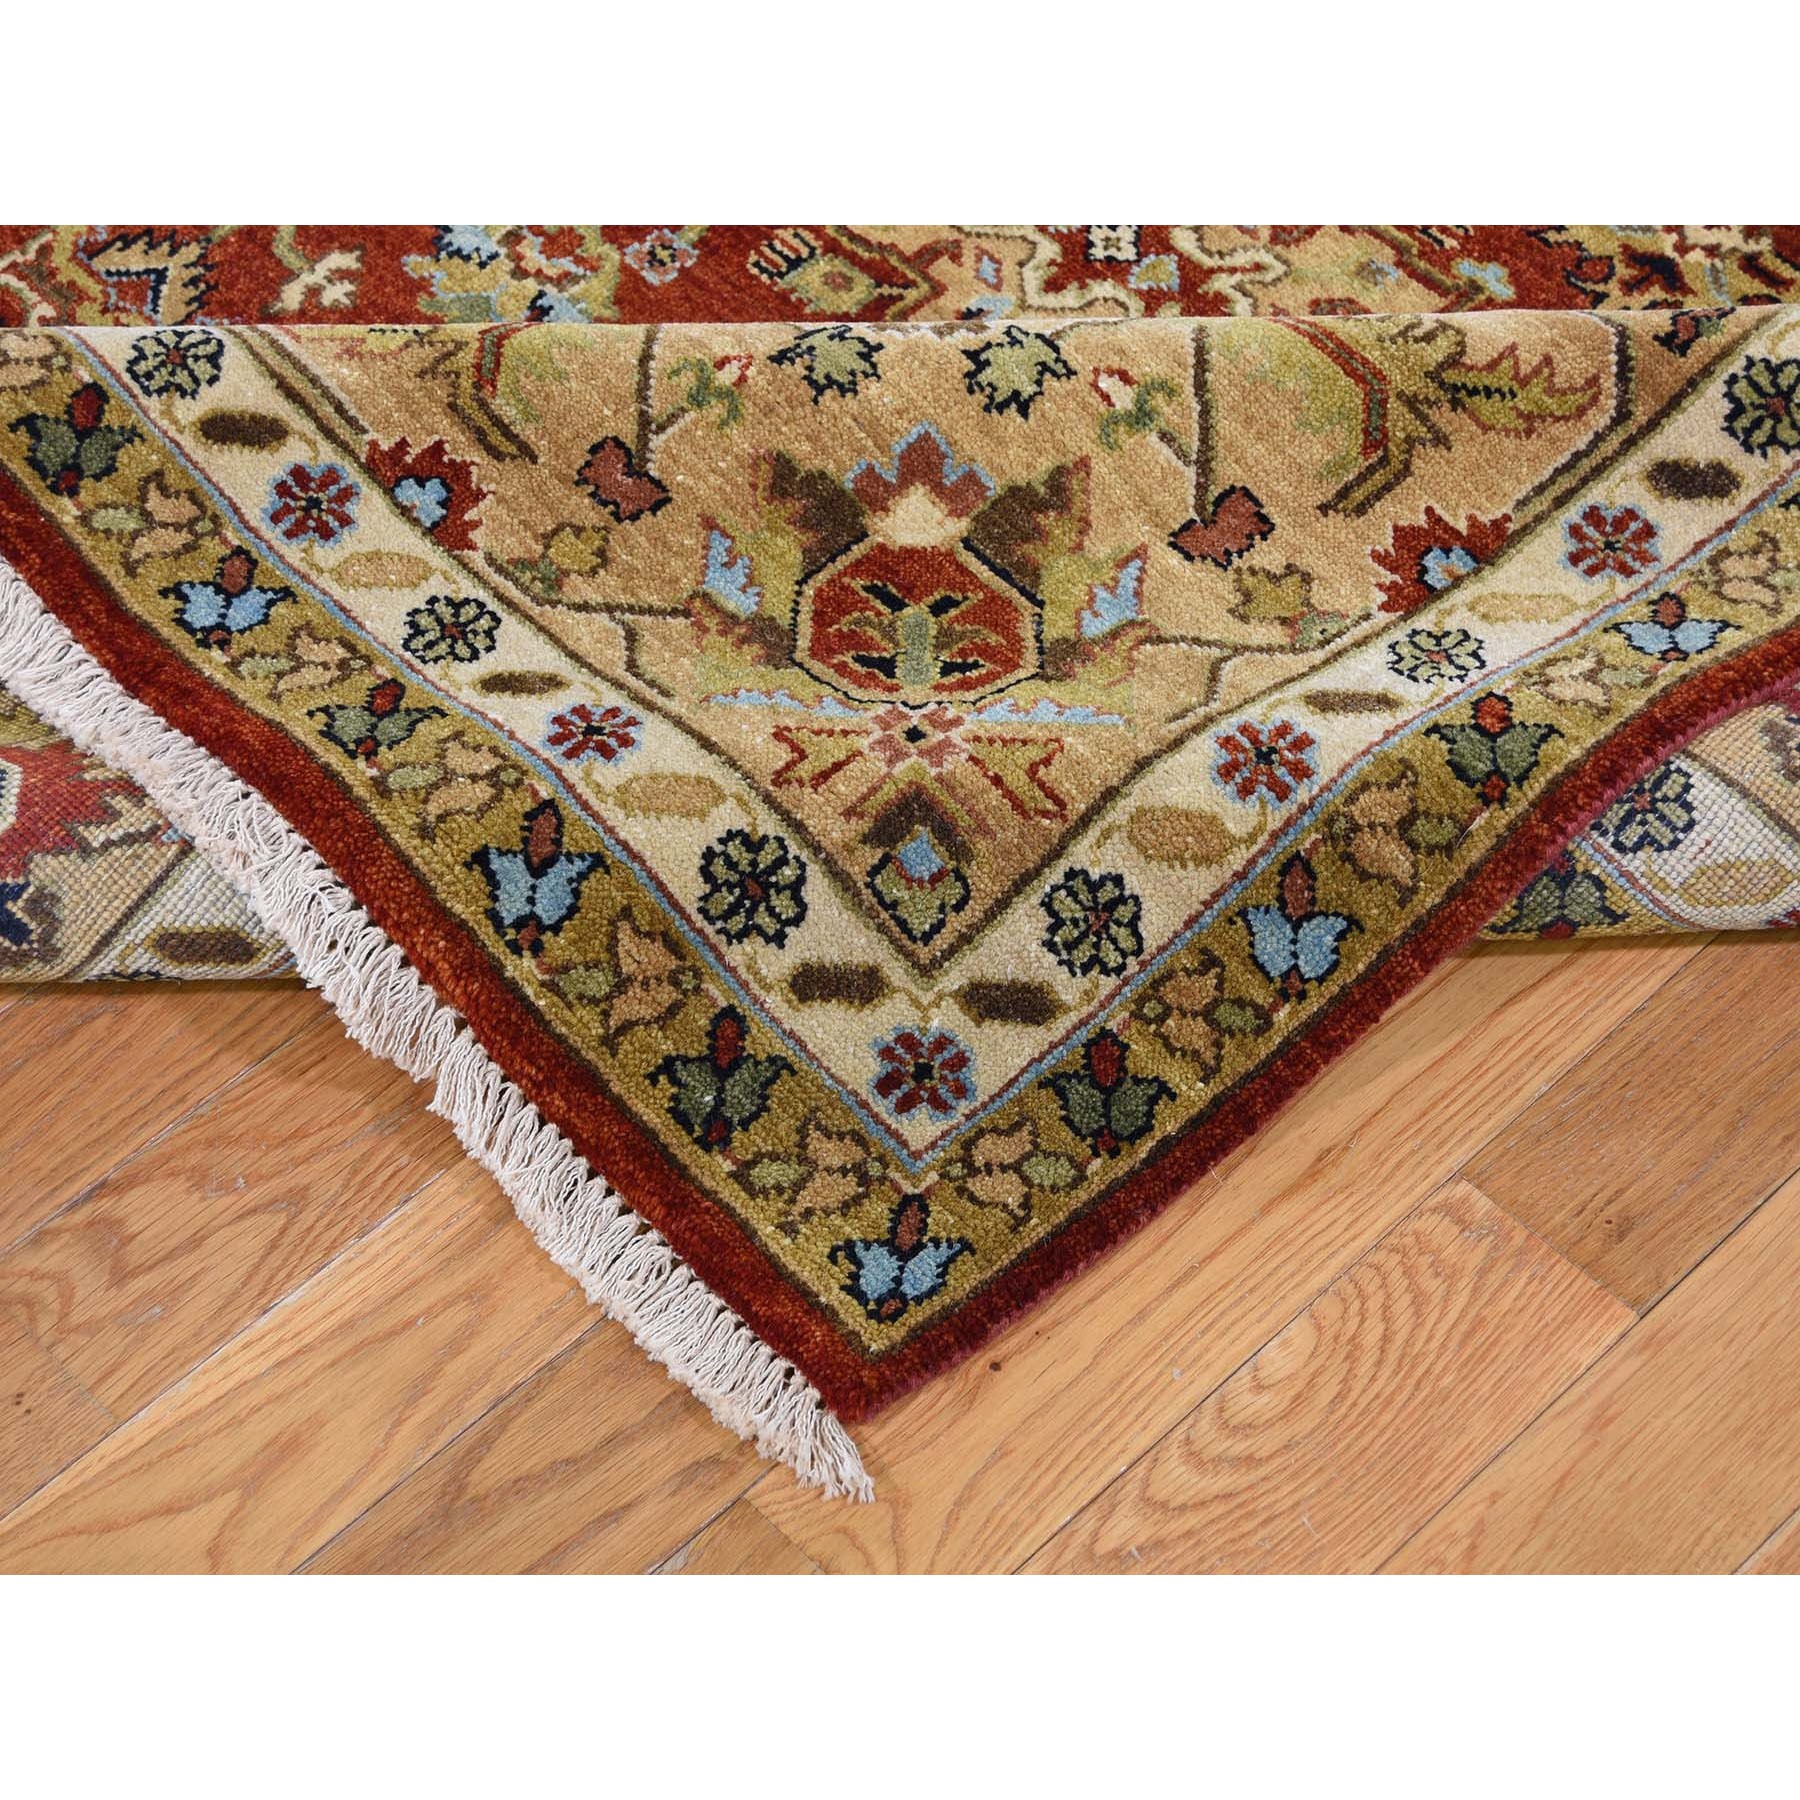 9-x12-1  Red Karajeh Design Pure Wool Hand Knotted Oriental Rug 